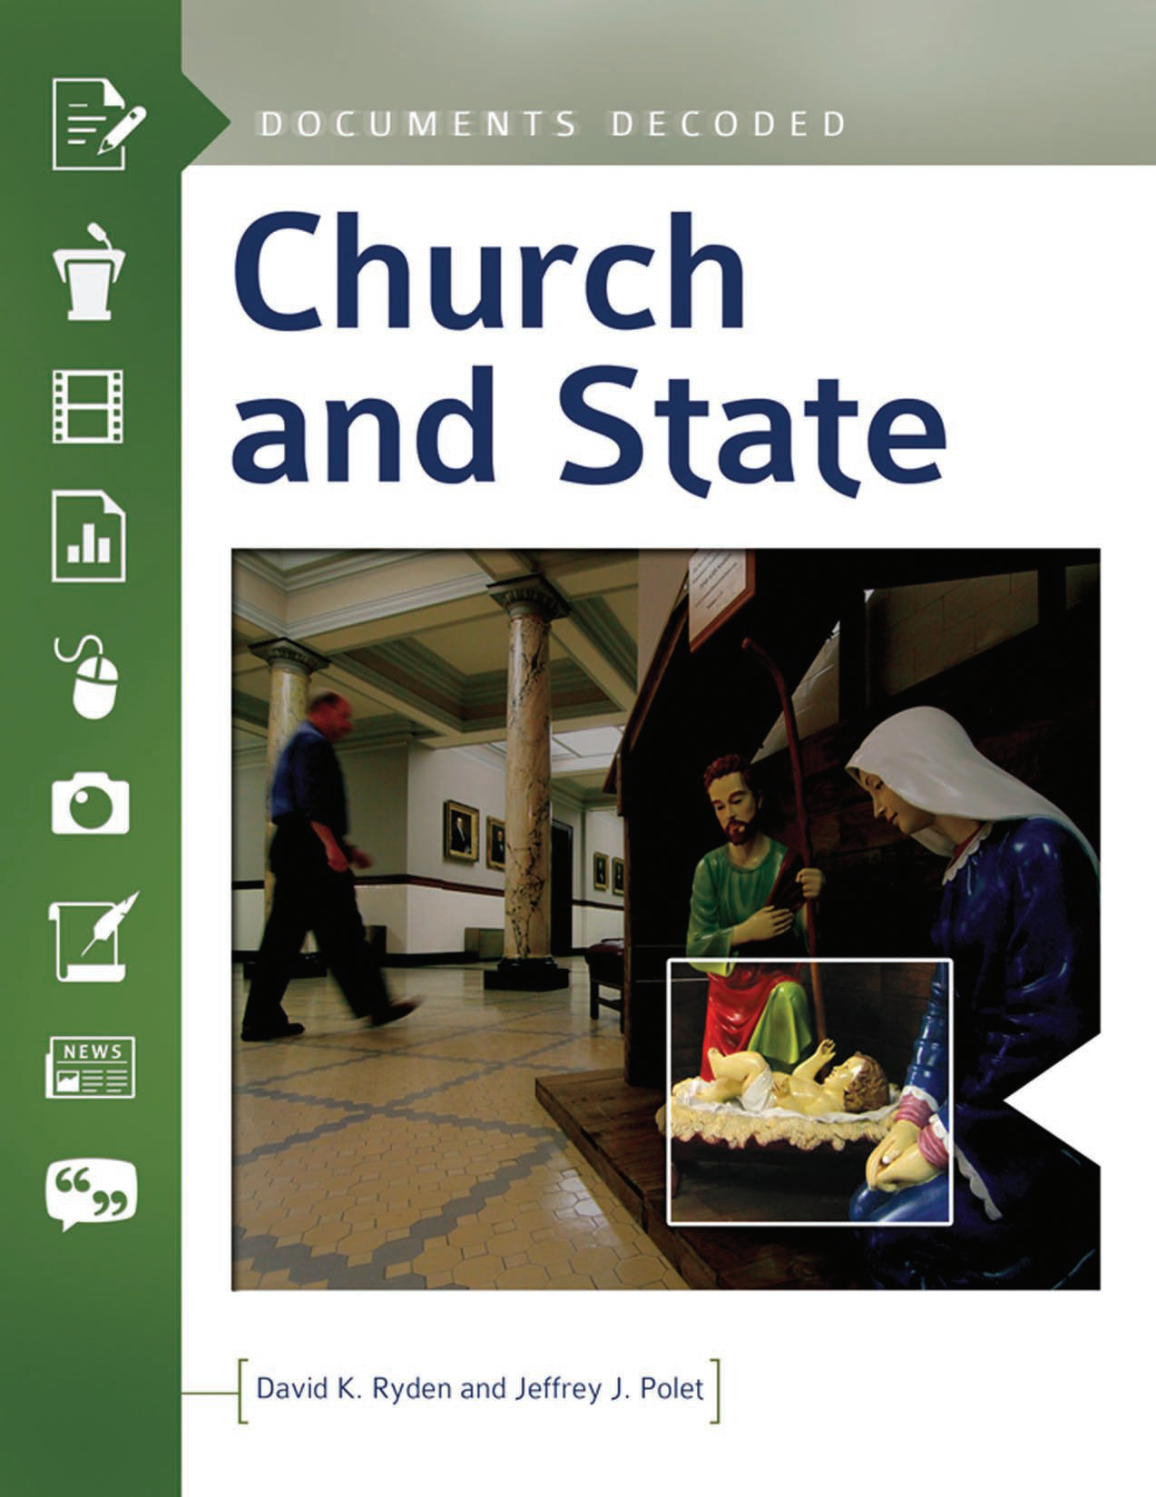 Church and State: Documents Decoded page Cover1